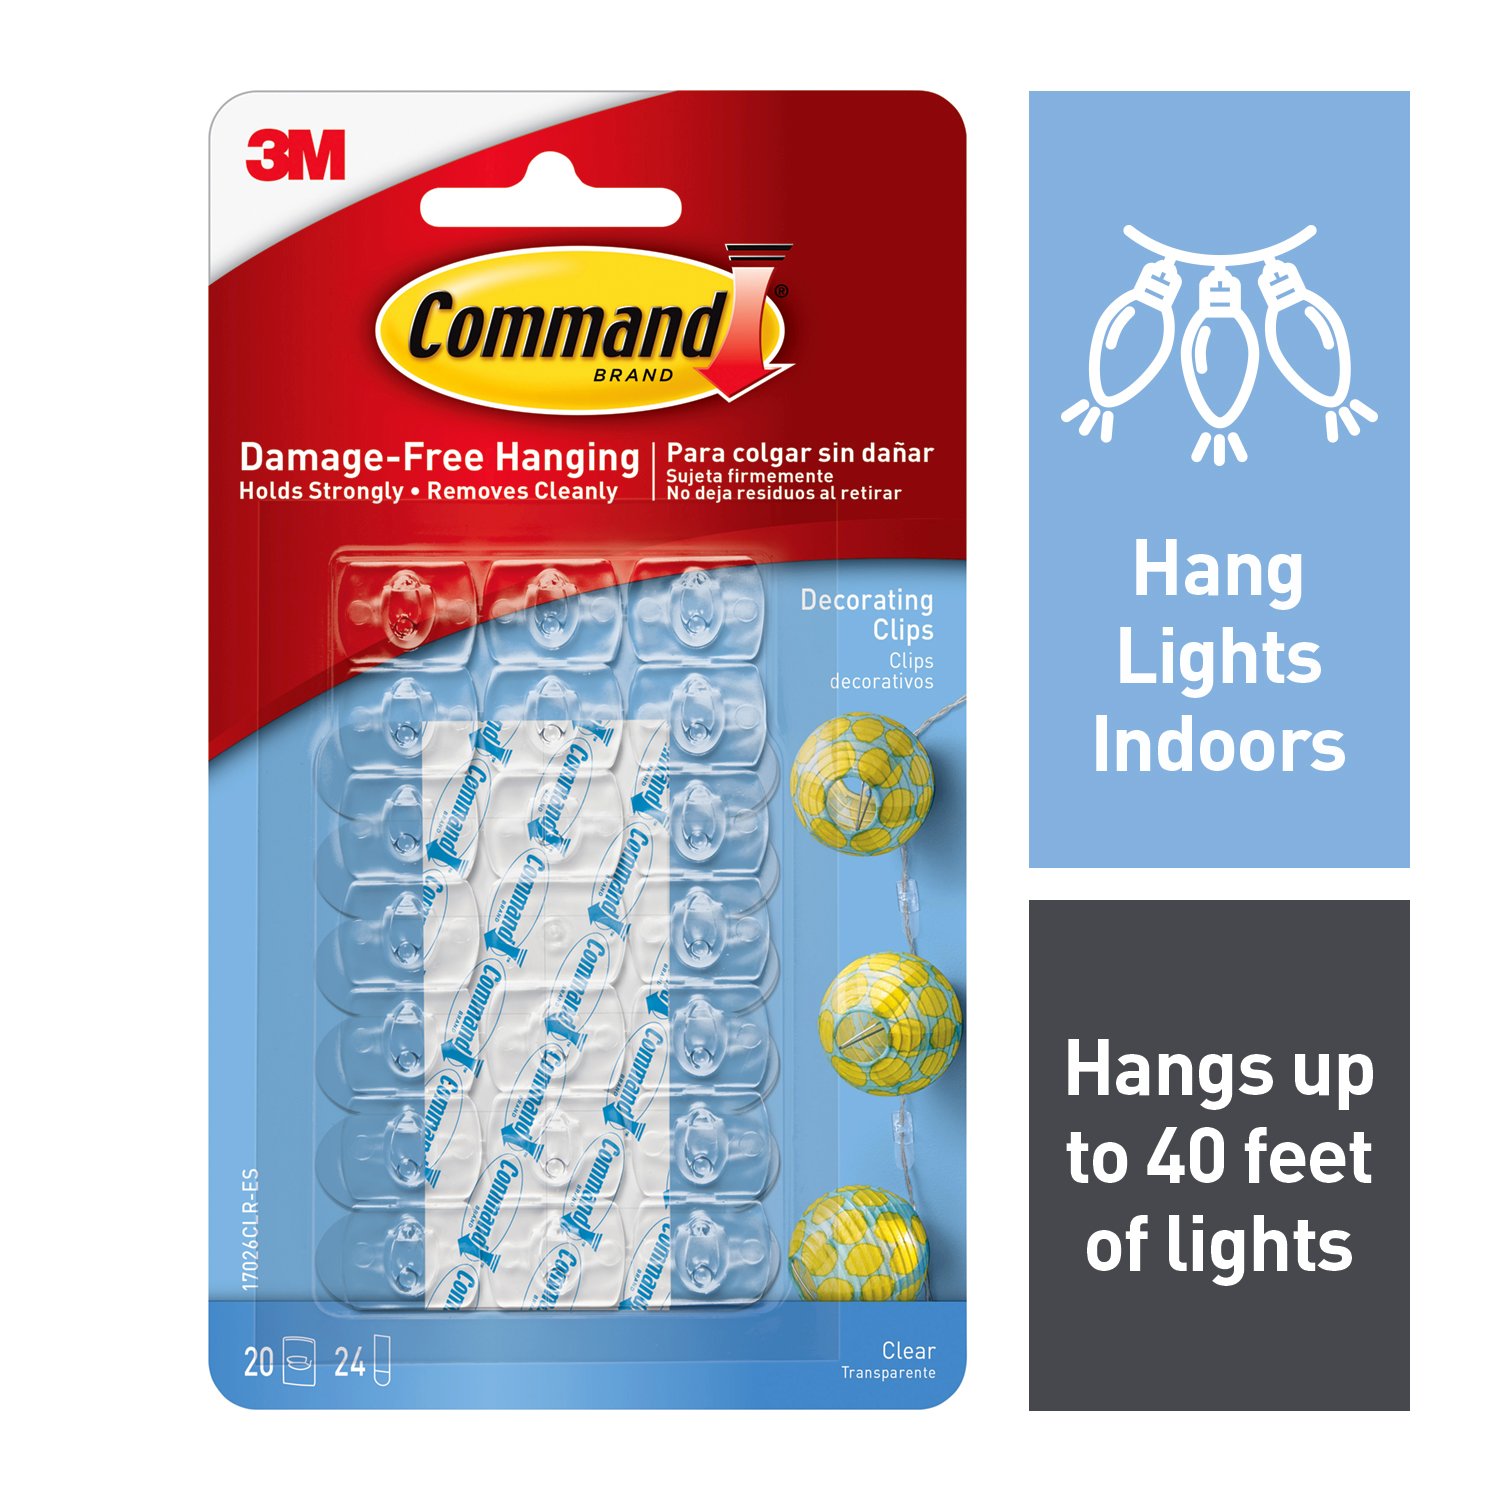 7000038172 - Command Clear Decorating Clips 17026CLR, 20 Clips, 24 Strips/Pack,
6/Bags, 36 Packs/Case